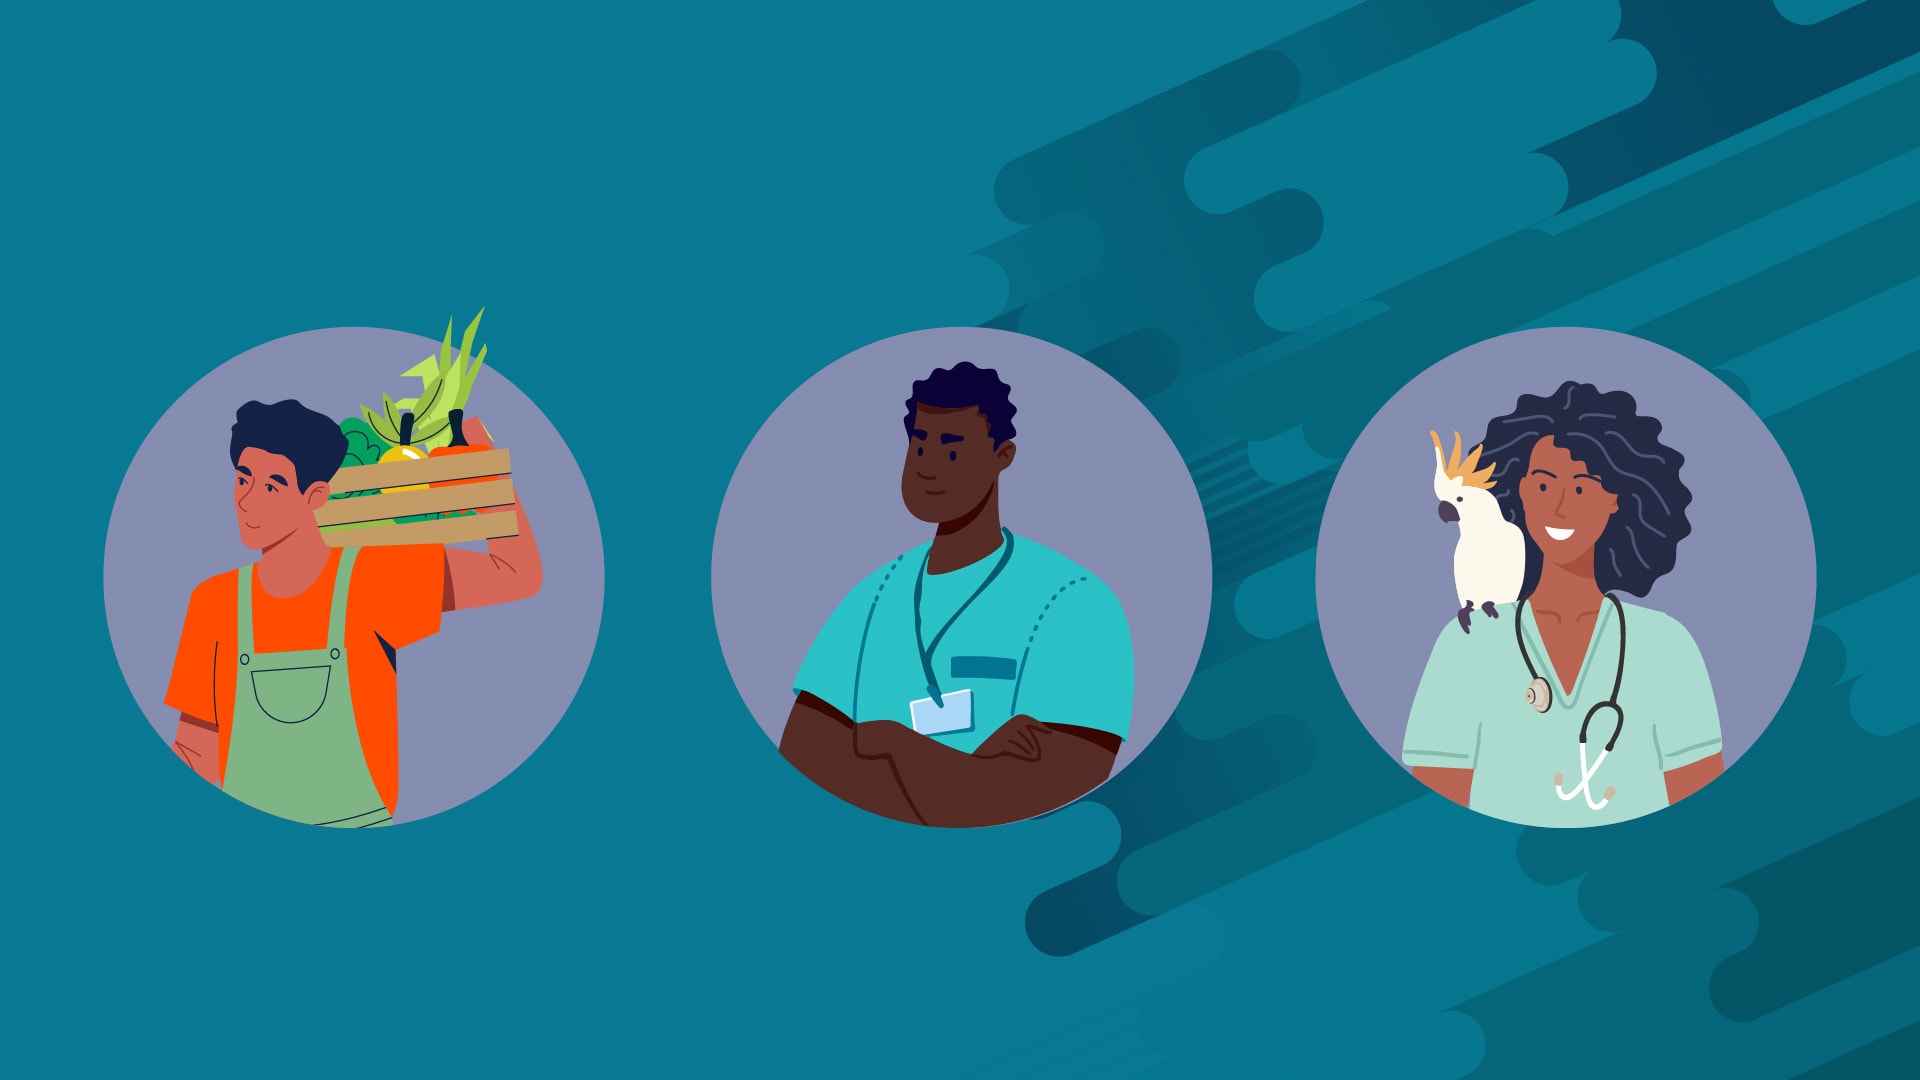 illustration of a farmer, a doctor, and a veterinarian.